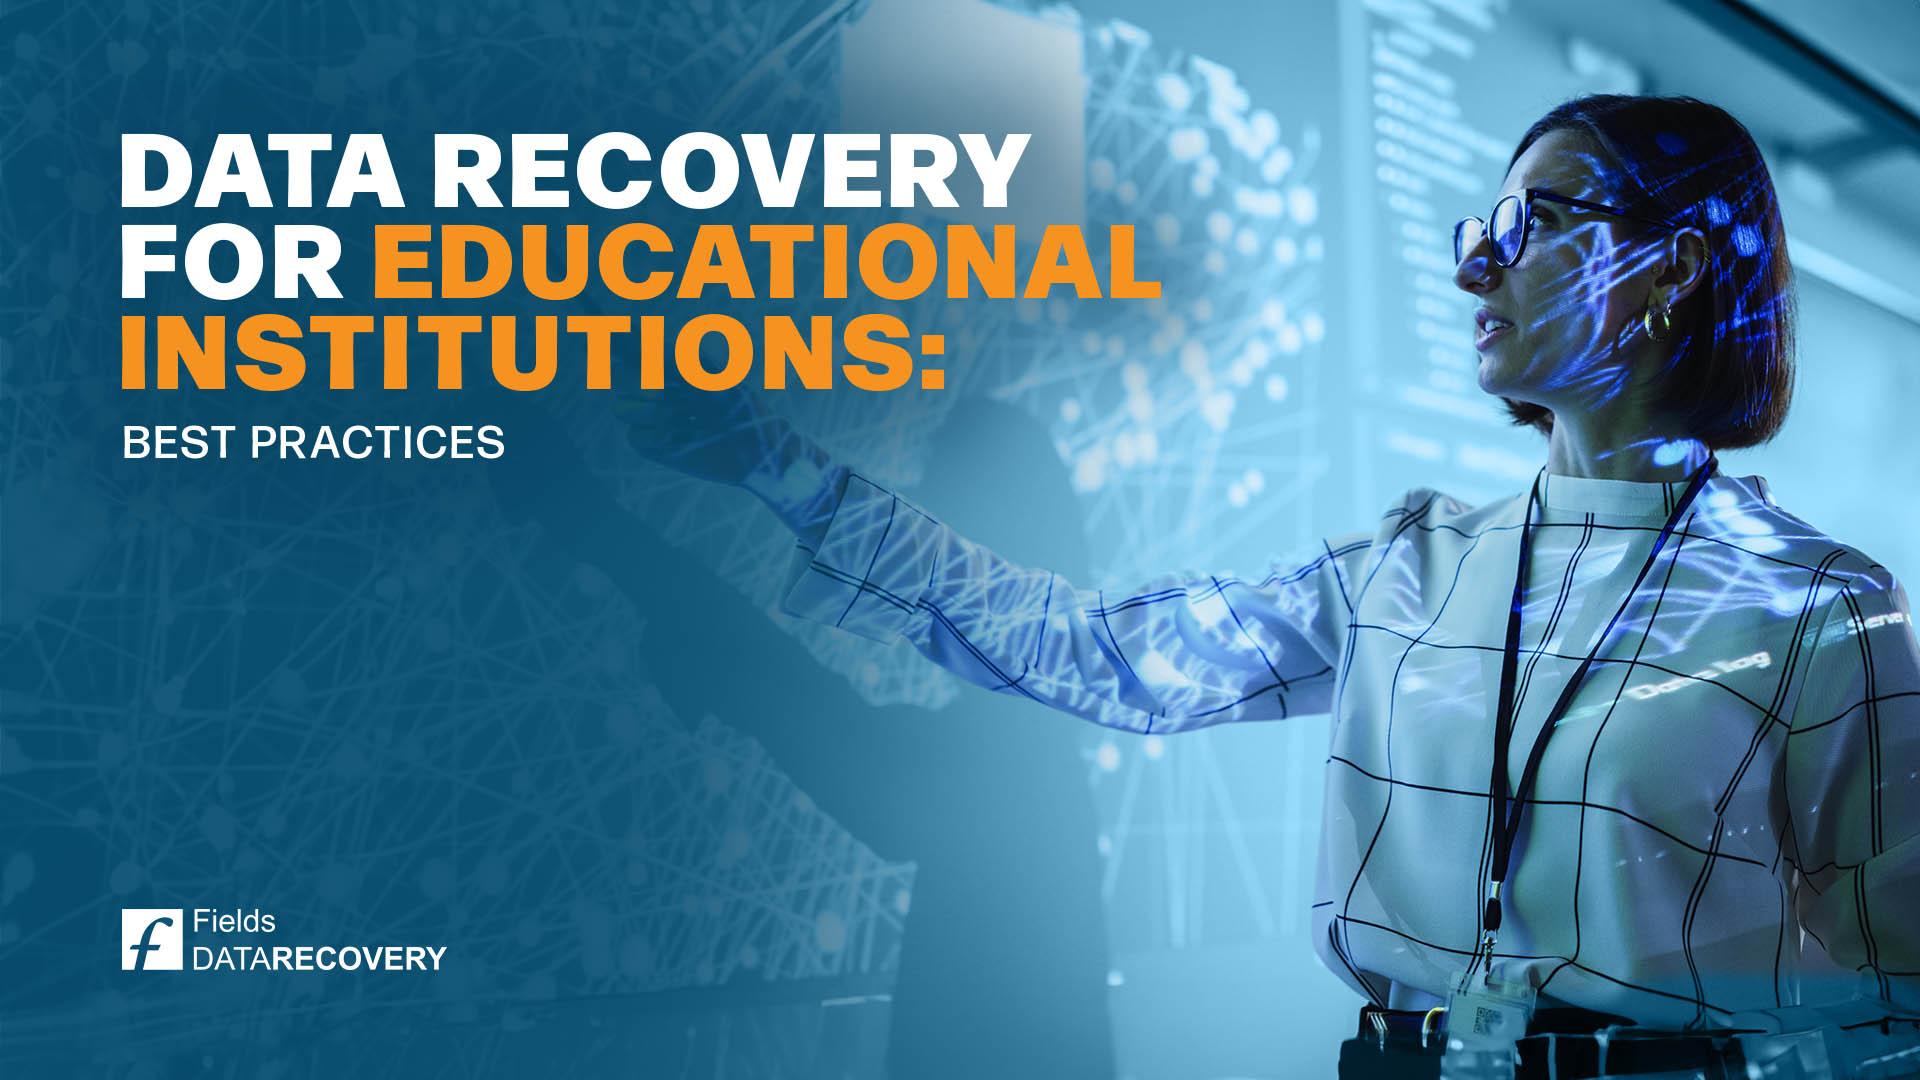 Data Recovery for Educational Institutions: Best Practices